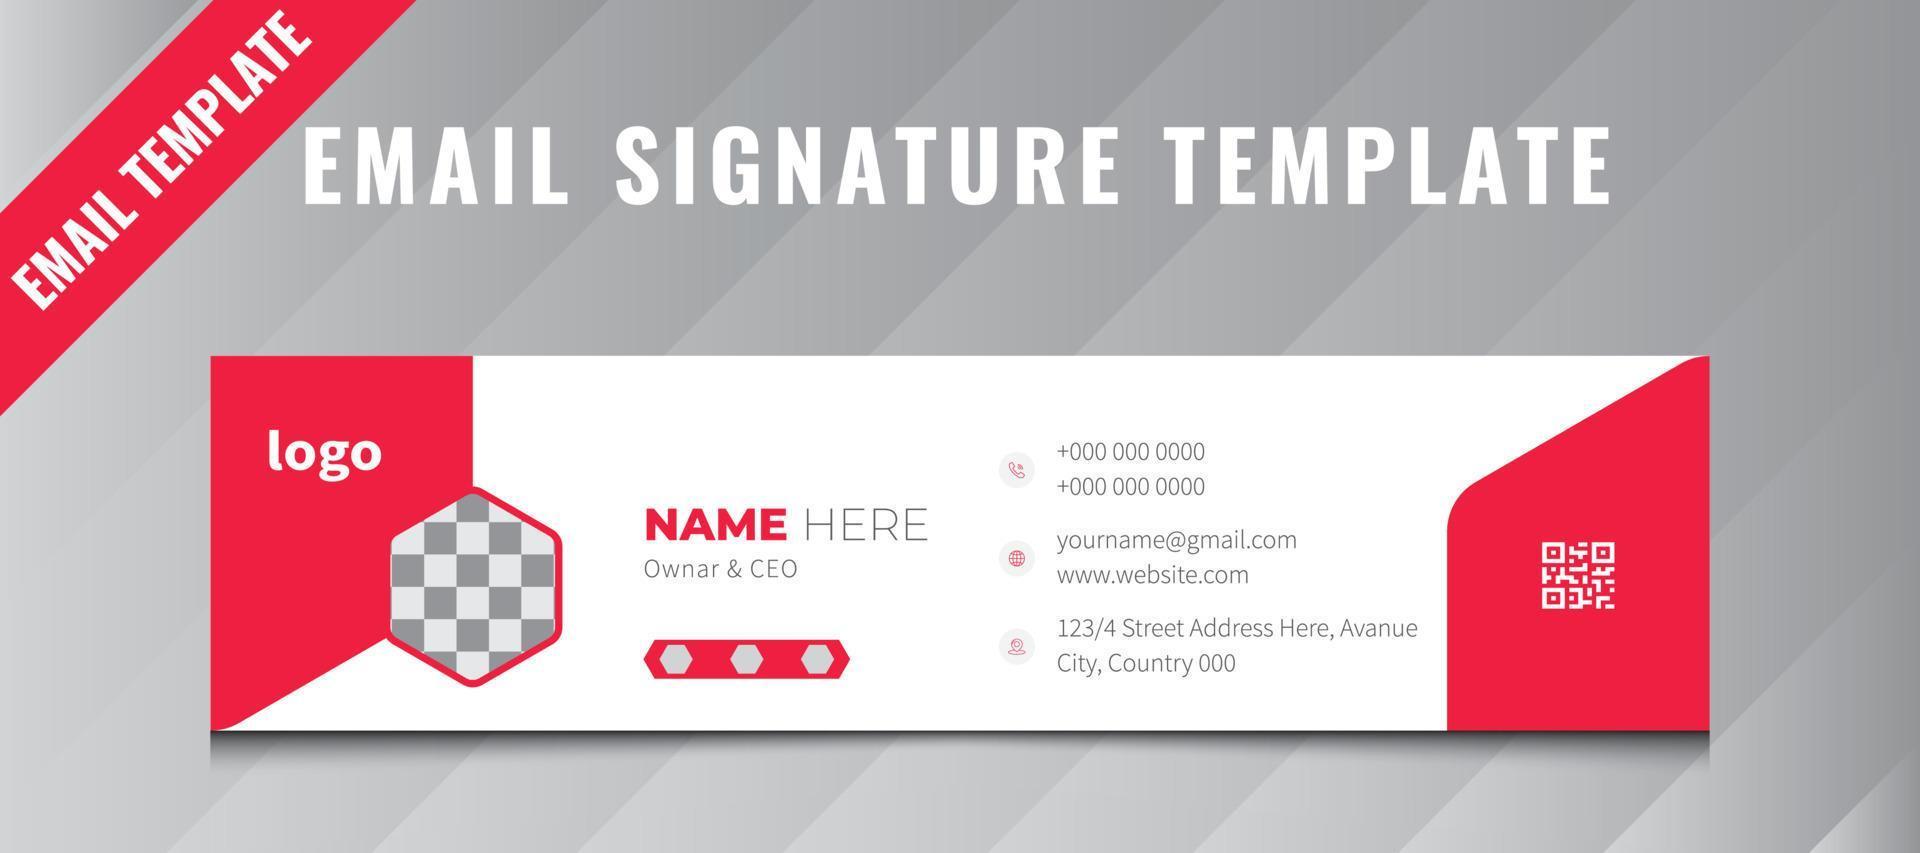 Modern e-mail signature design template, Corporate Email signature template or email footer and personal social media cover templates with an author photo place creative modern layout, Creative Email. vector